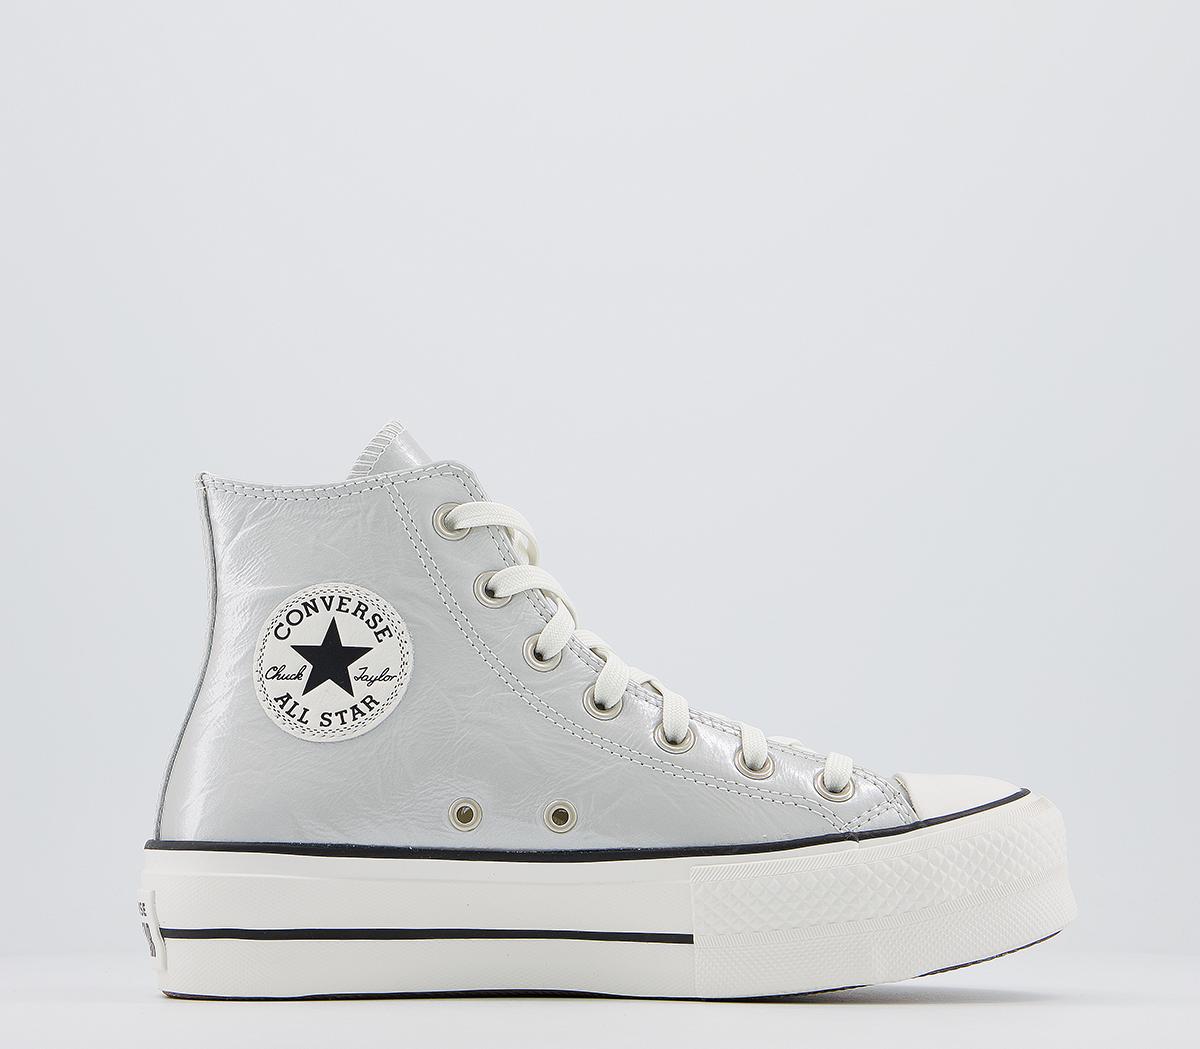 ConverseAll Star Lift Hi TrainersSilver Crinkle Metallic